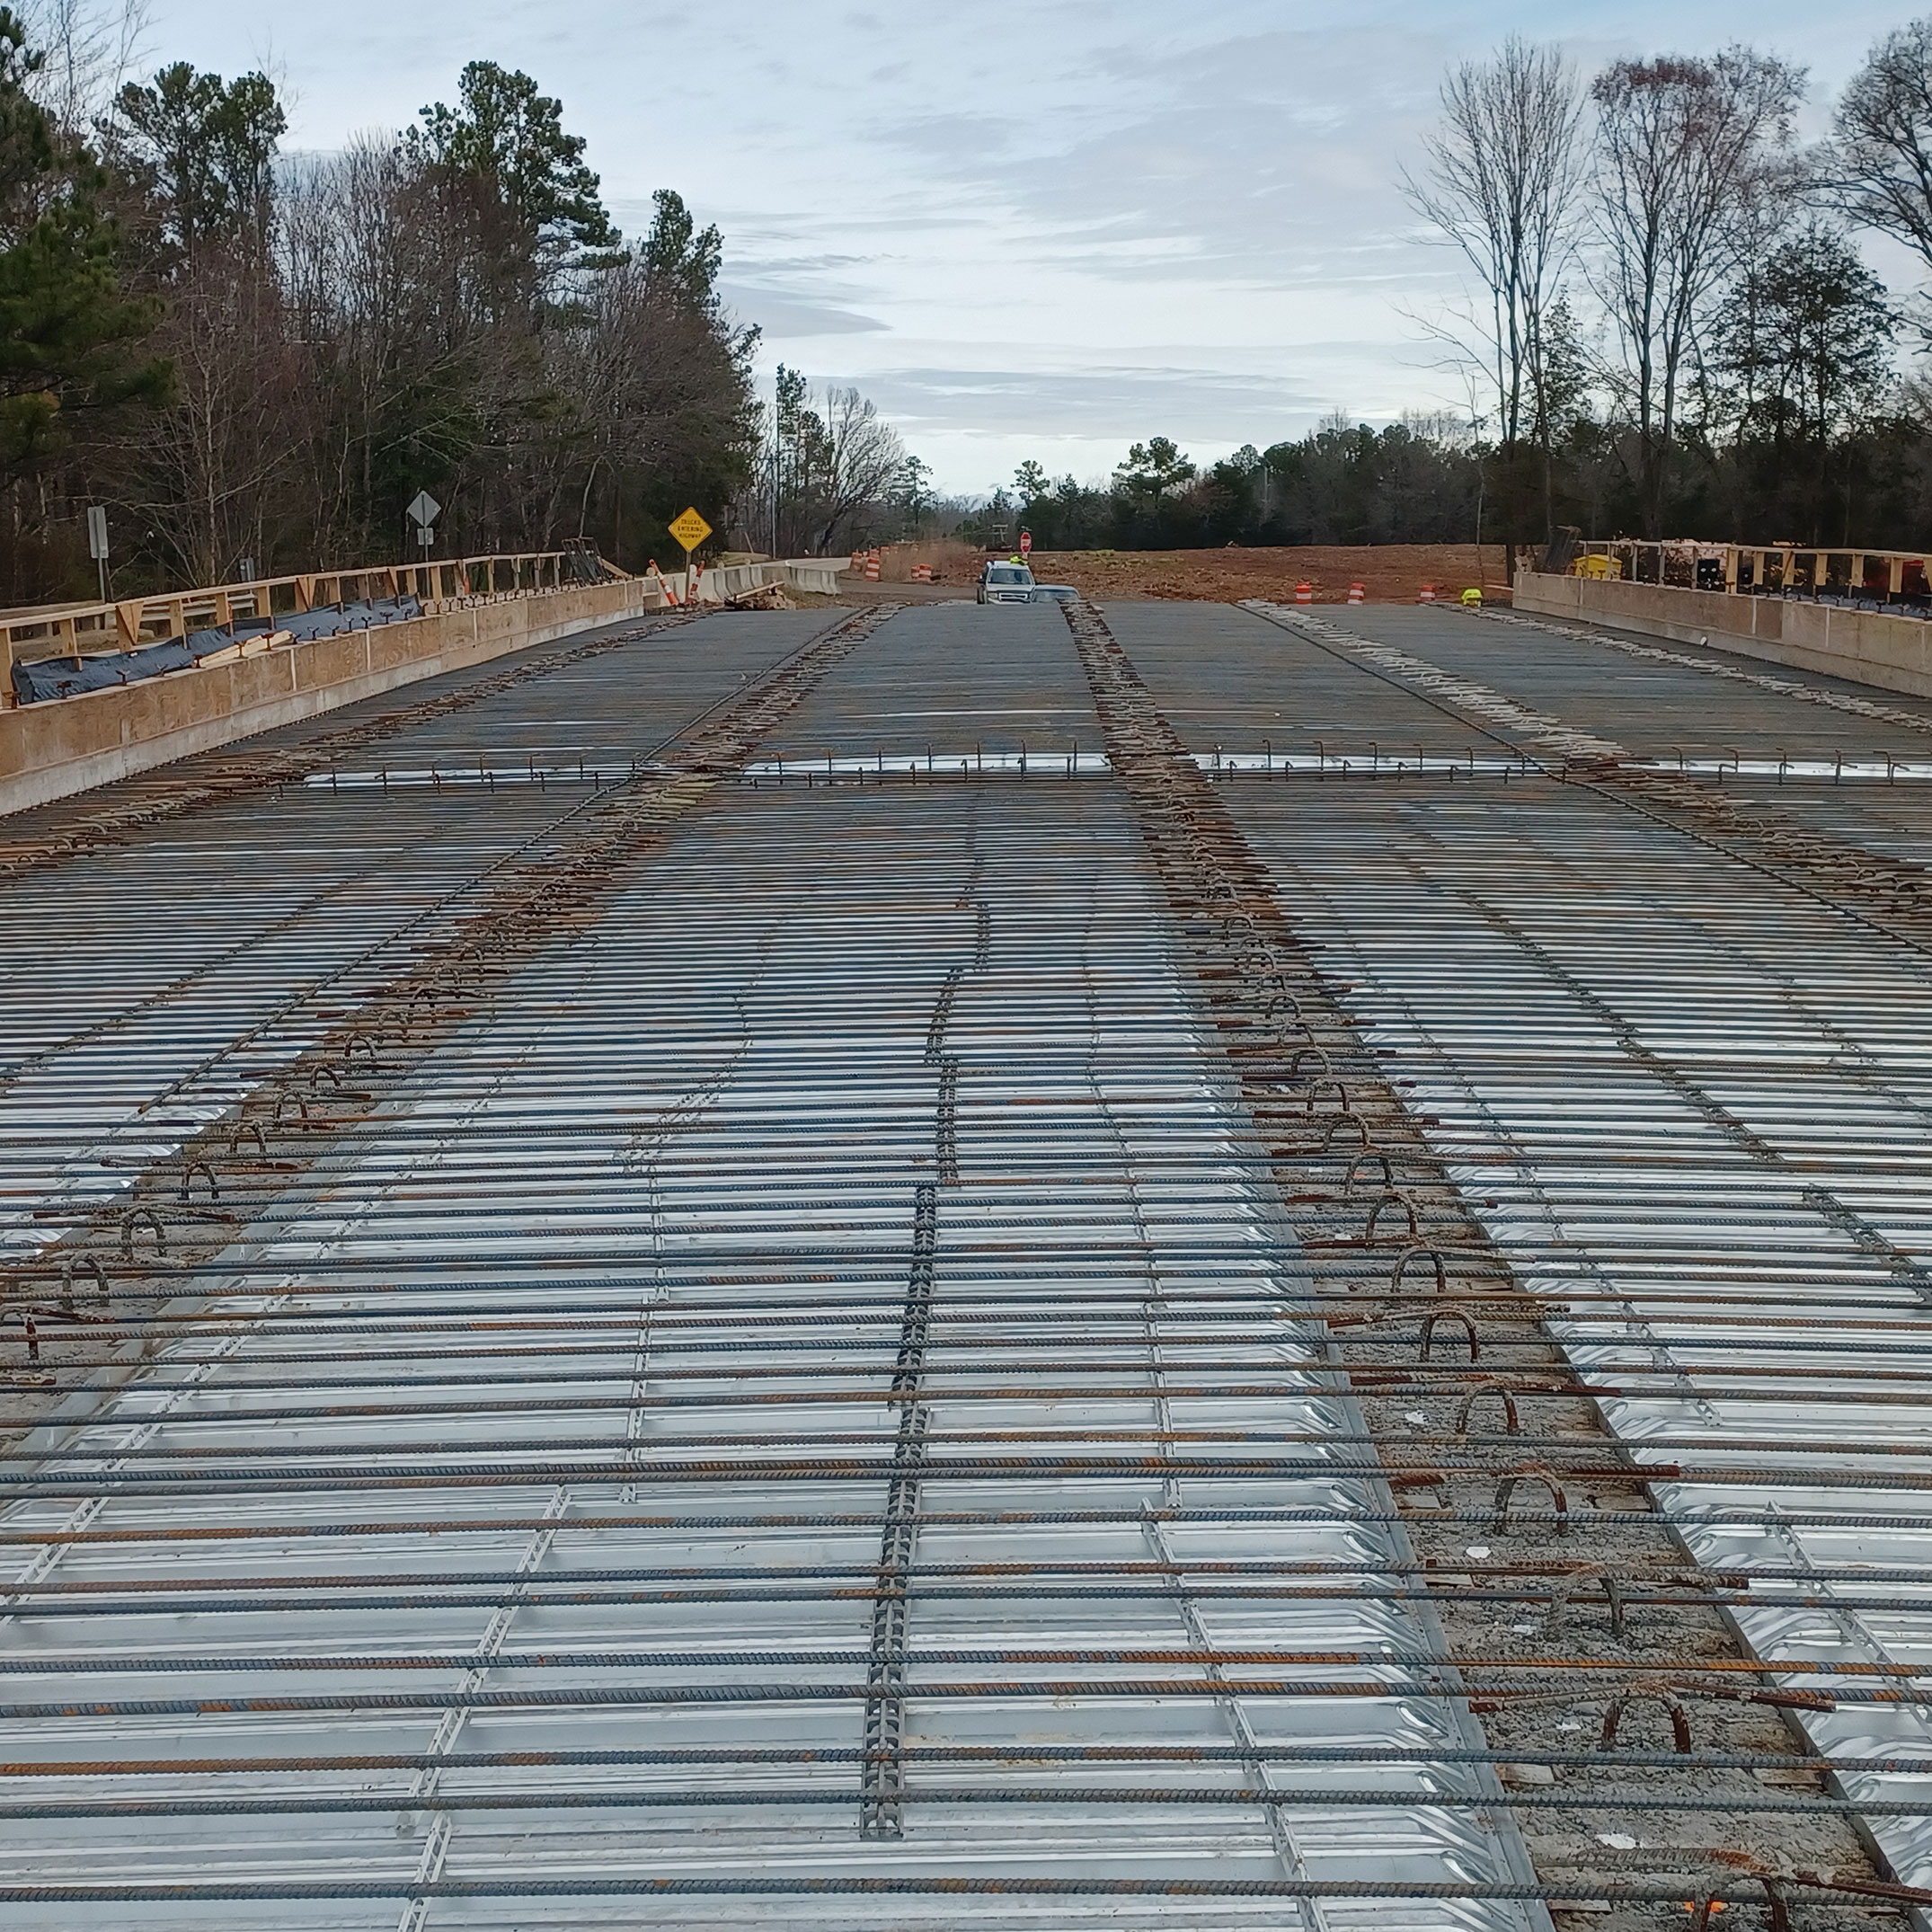 The contractor has started to place the reinforcing steel on the bridge deck of the new bridge on Mount Vernon Church Road over I-26.  Over 69,000 lbs of steel will be placed in this bridge deck before concrete can be placed.